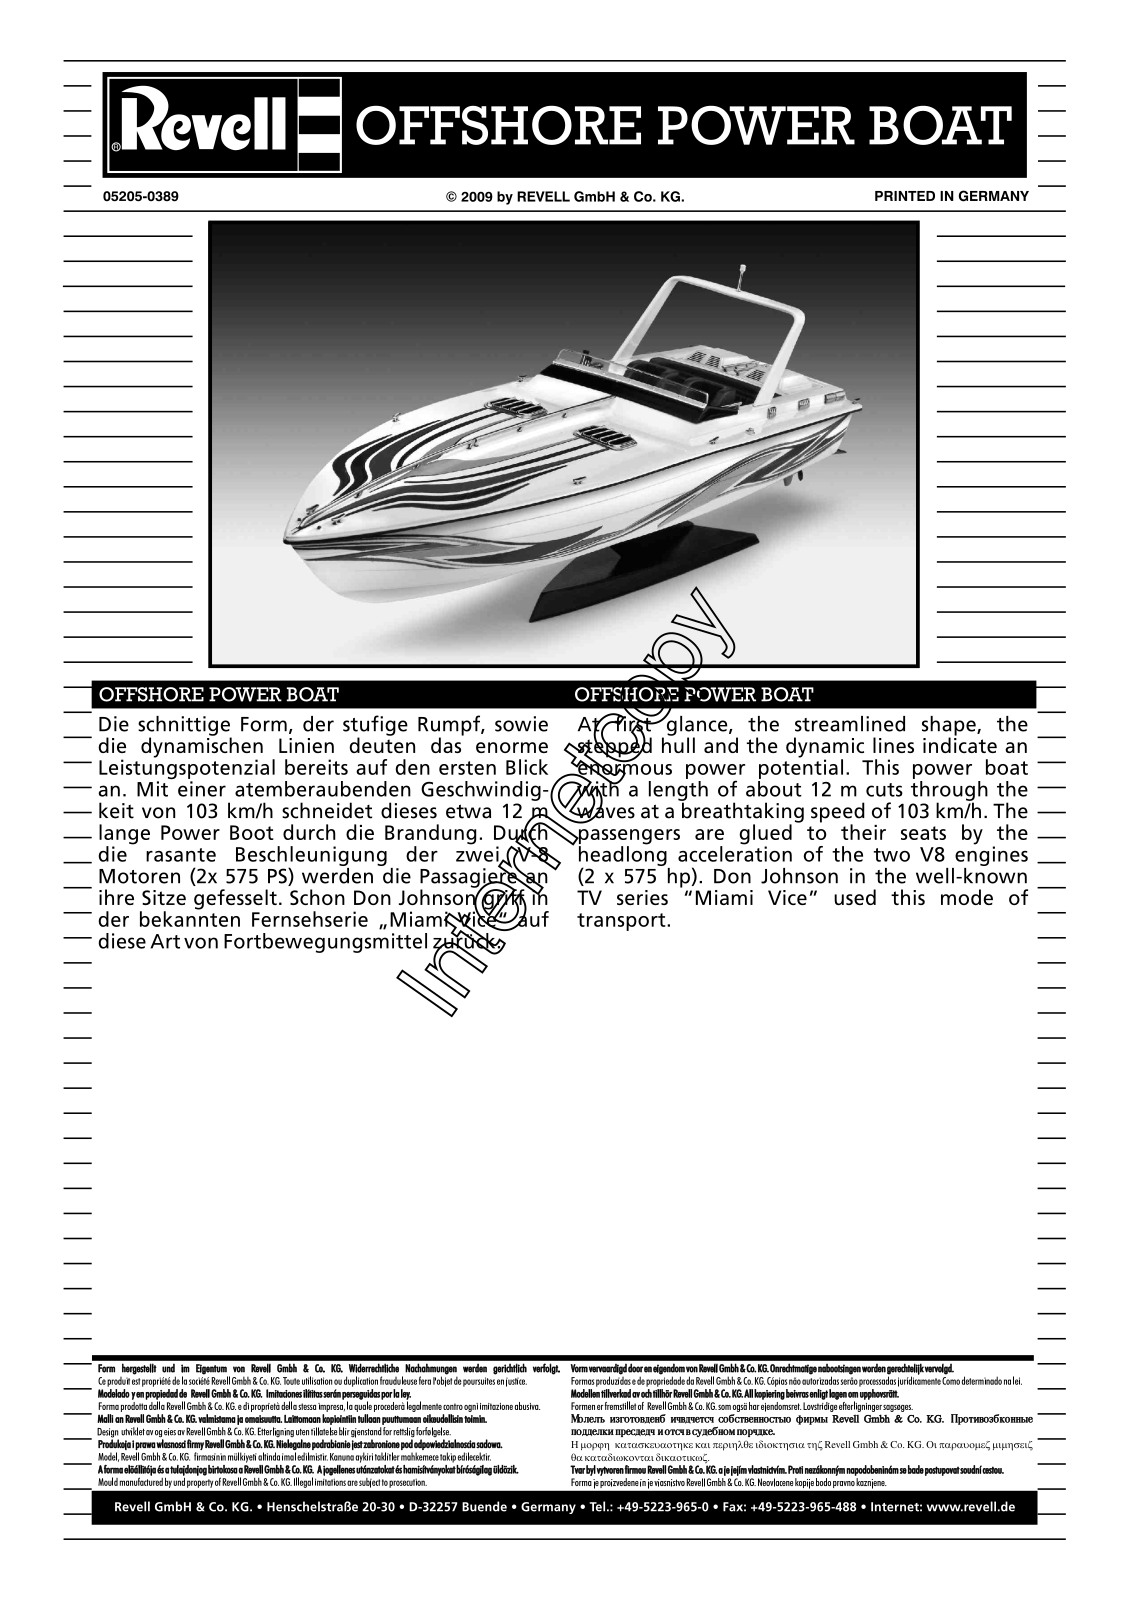 REVELL Offshore Powerboat User Manual